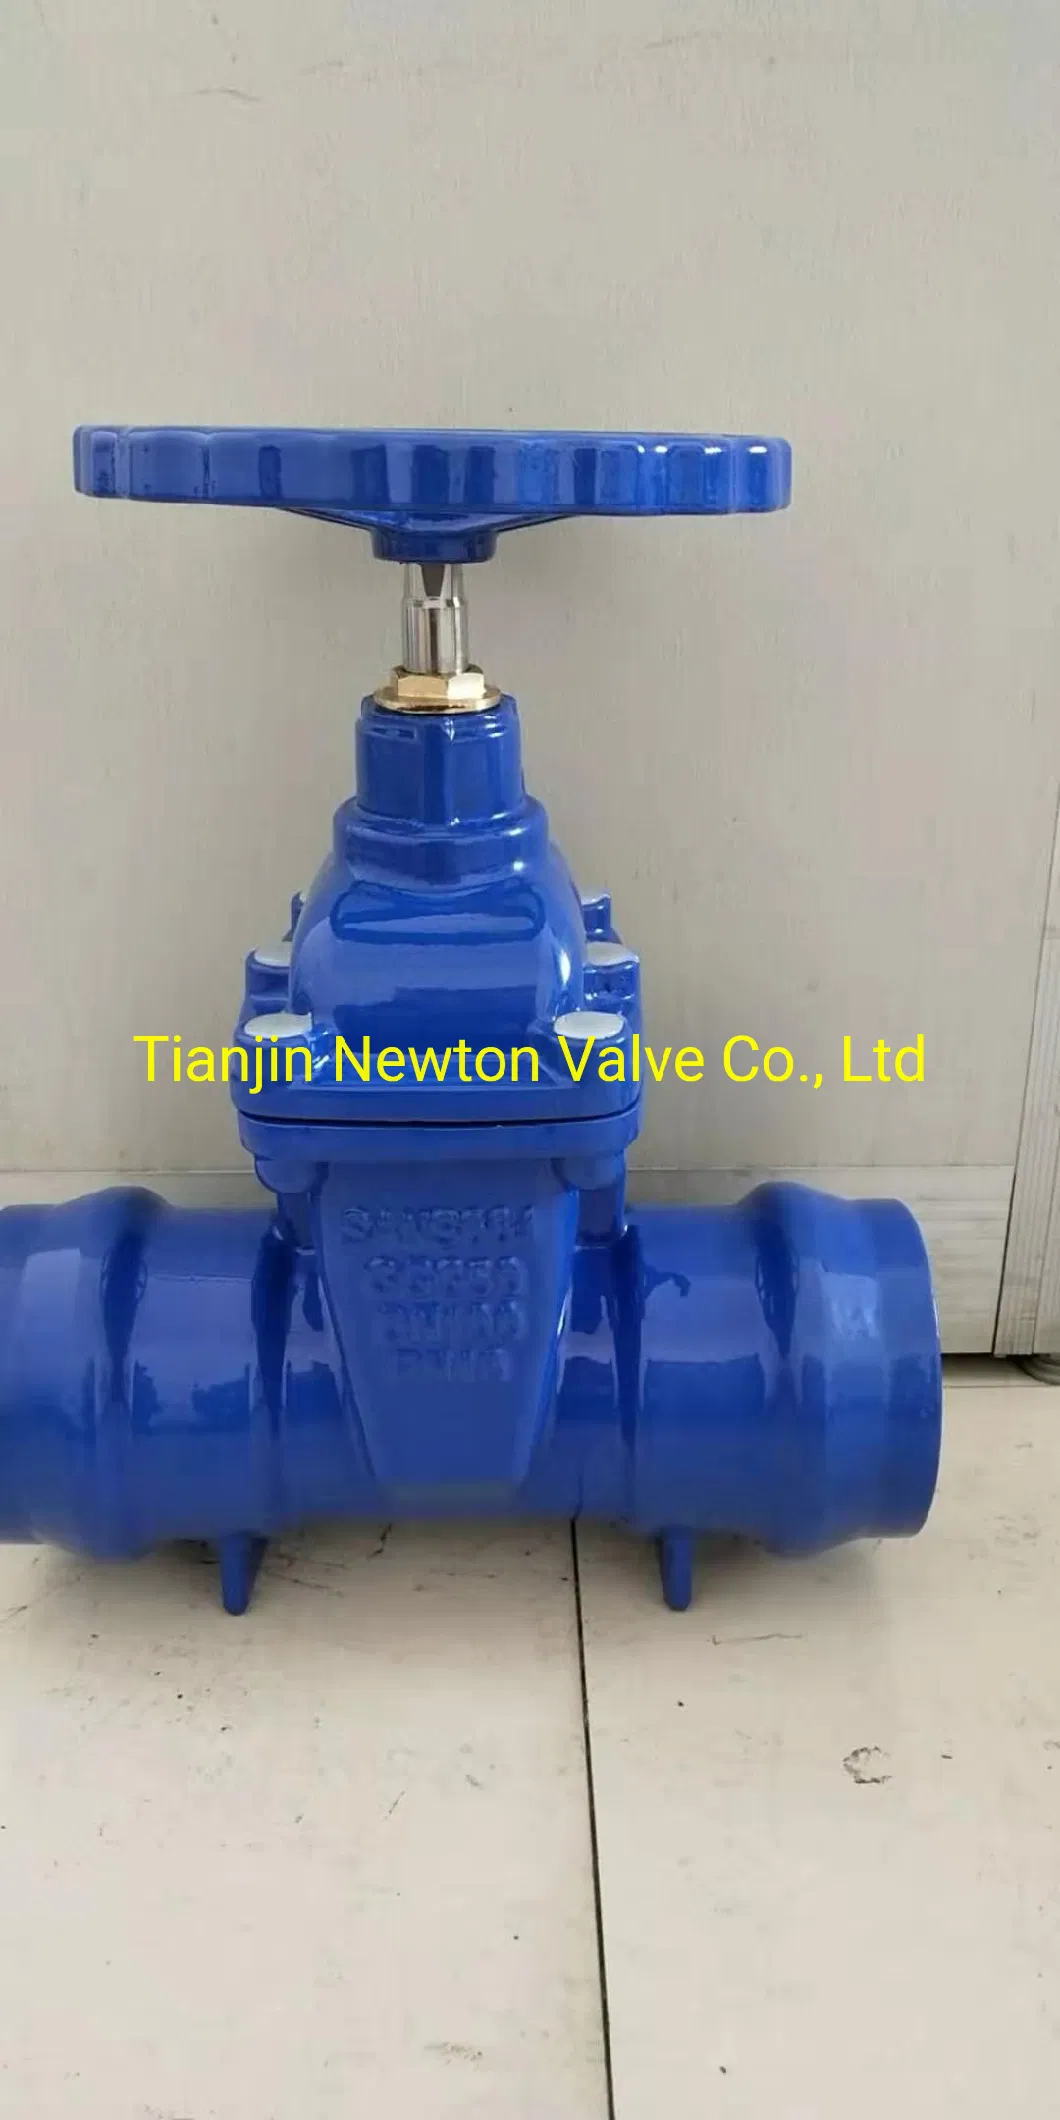 SABS 663 664 DIN3202 F5 Socket End Type Resilient Rubber Seat Seated Non-Rising Stem Gate Valve with Hand Wheel Head Square Cap for PE PVC HDPE Pipe